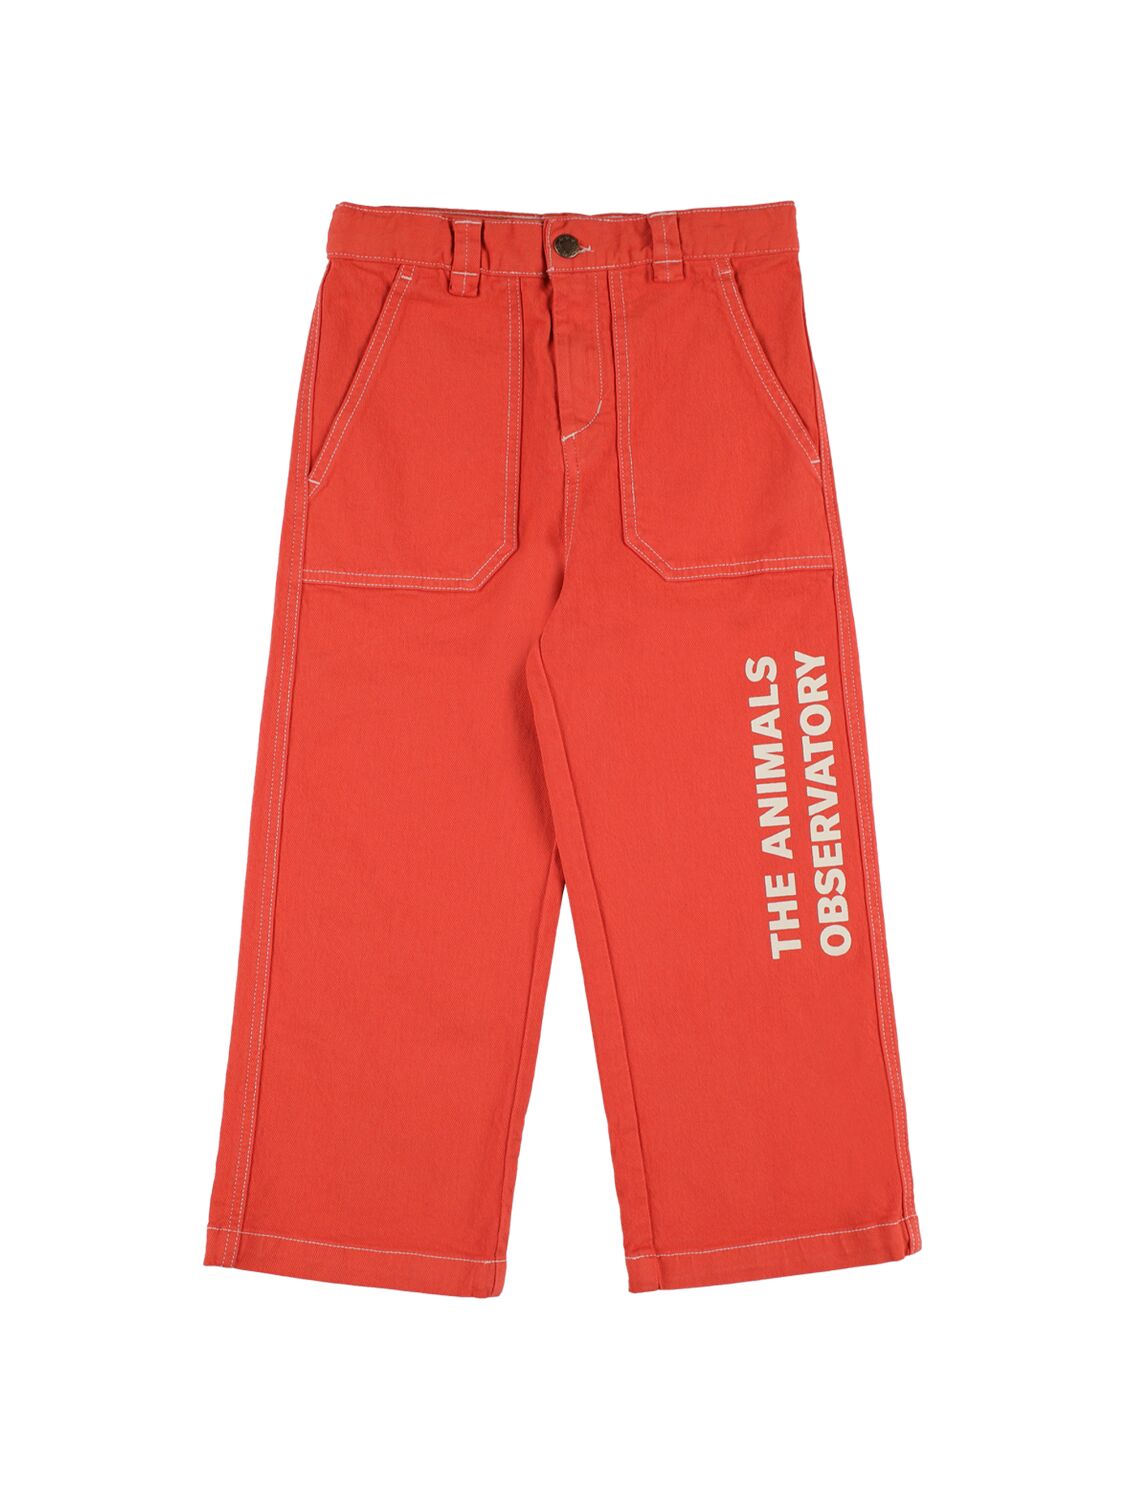 THE ANIMALS OBSERVATORY RECYCLED COTTON BLEND PANTS